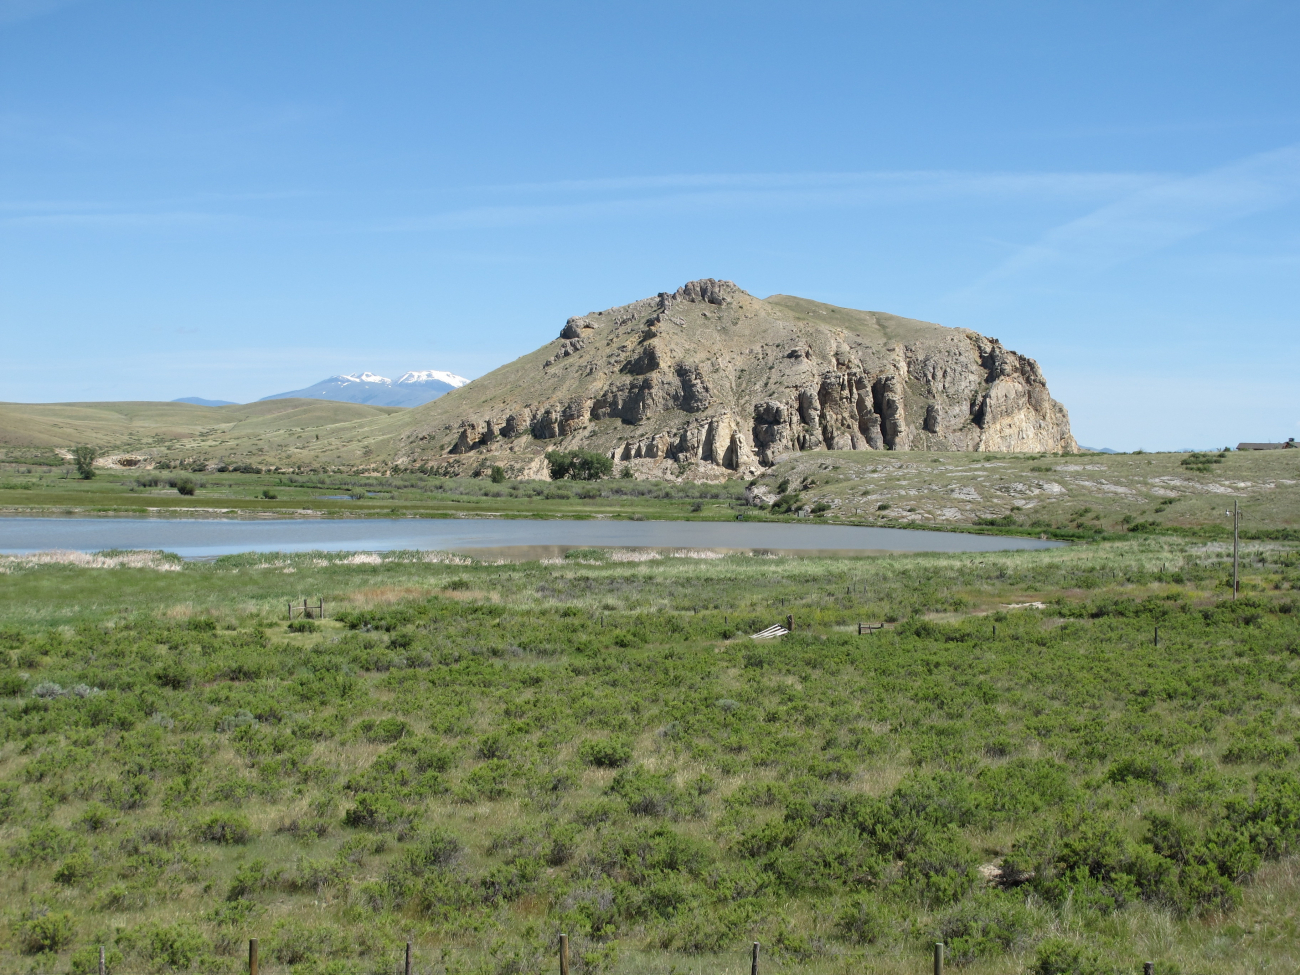 Beaverhead Rock, which Sacajawea, the guide of the Lewis and Clark Expedition,recognized as the landmark for the summer hunting ground of her people, theShoshone